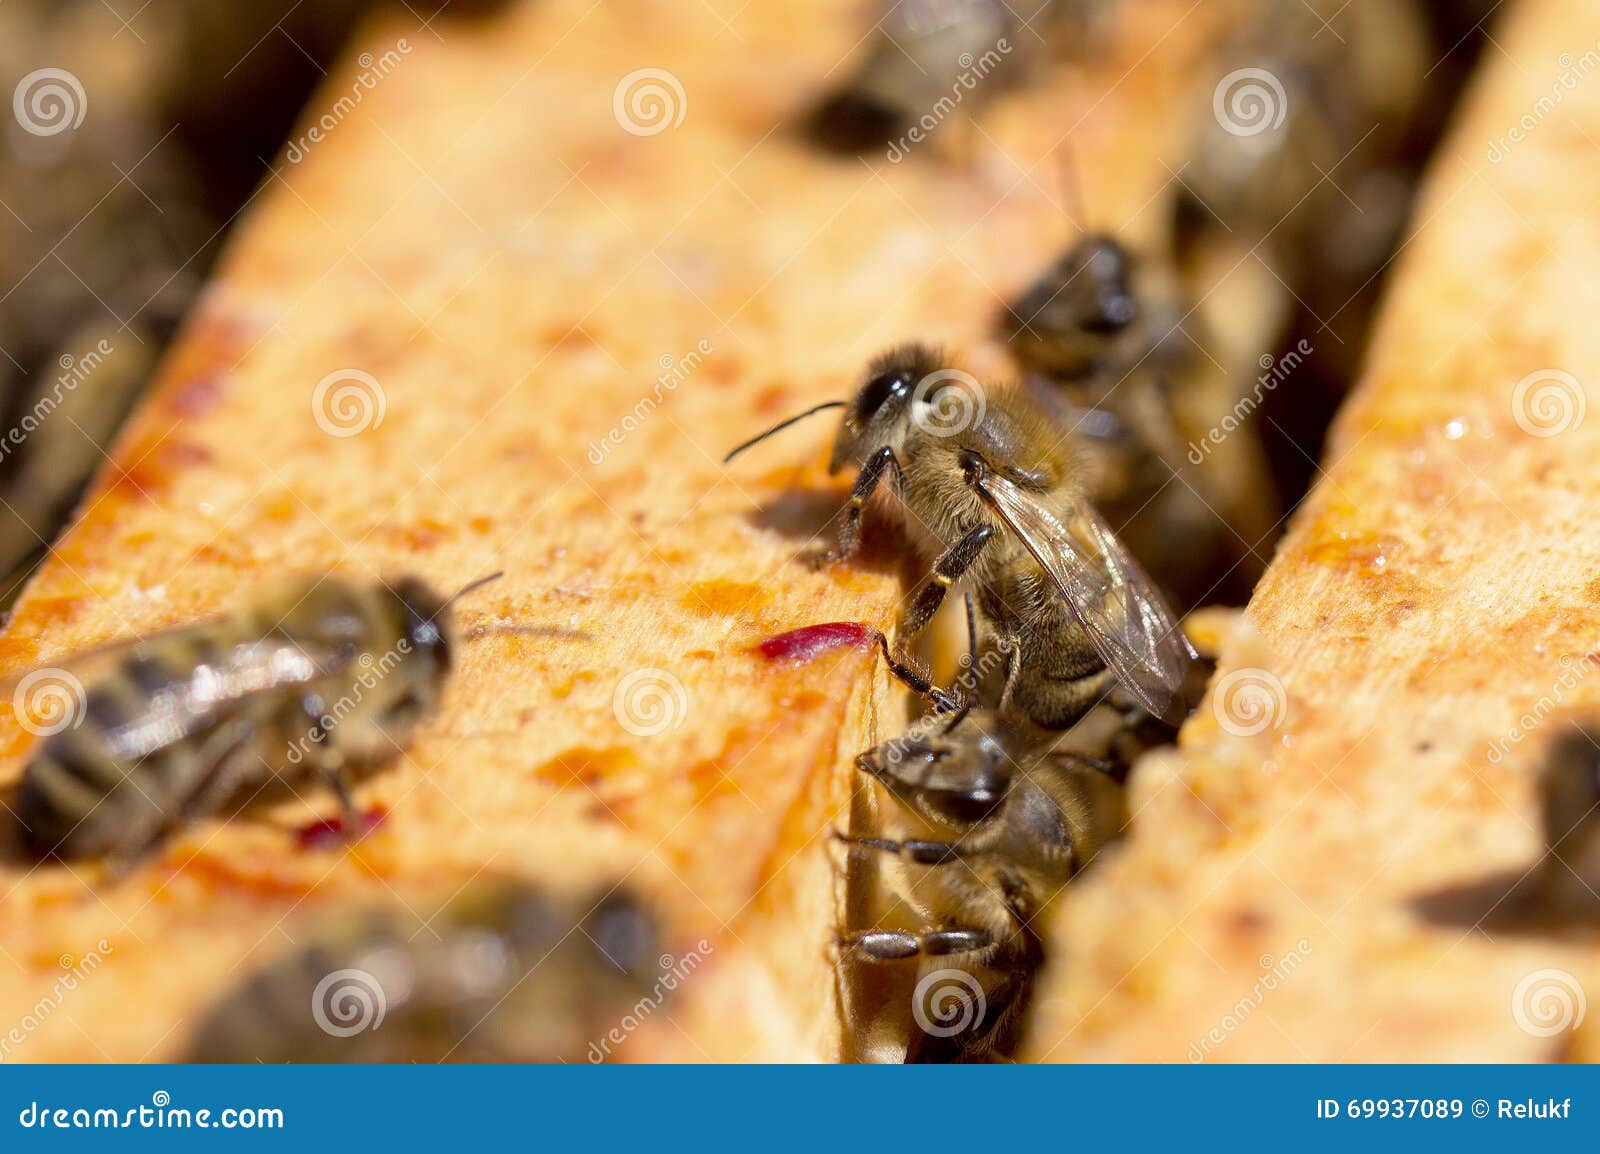 Bees on honeycomb in hive